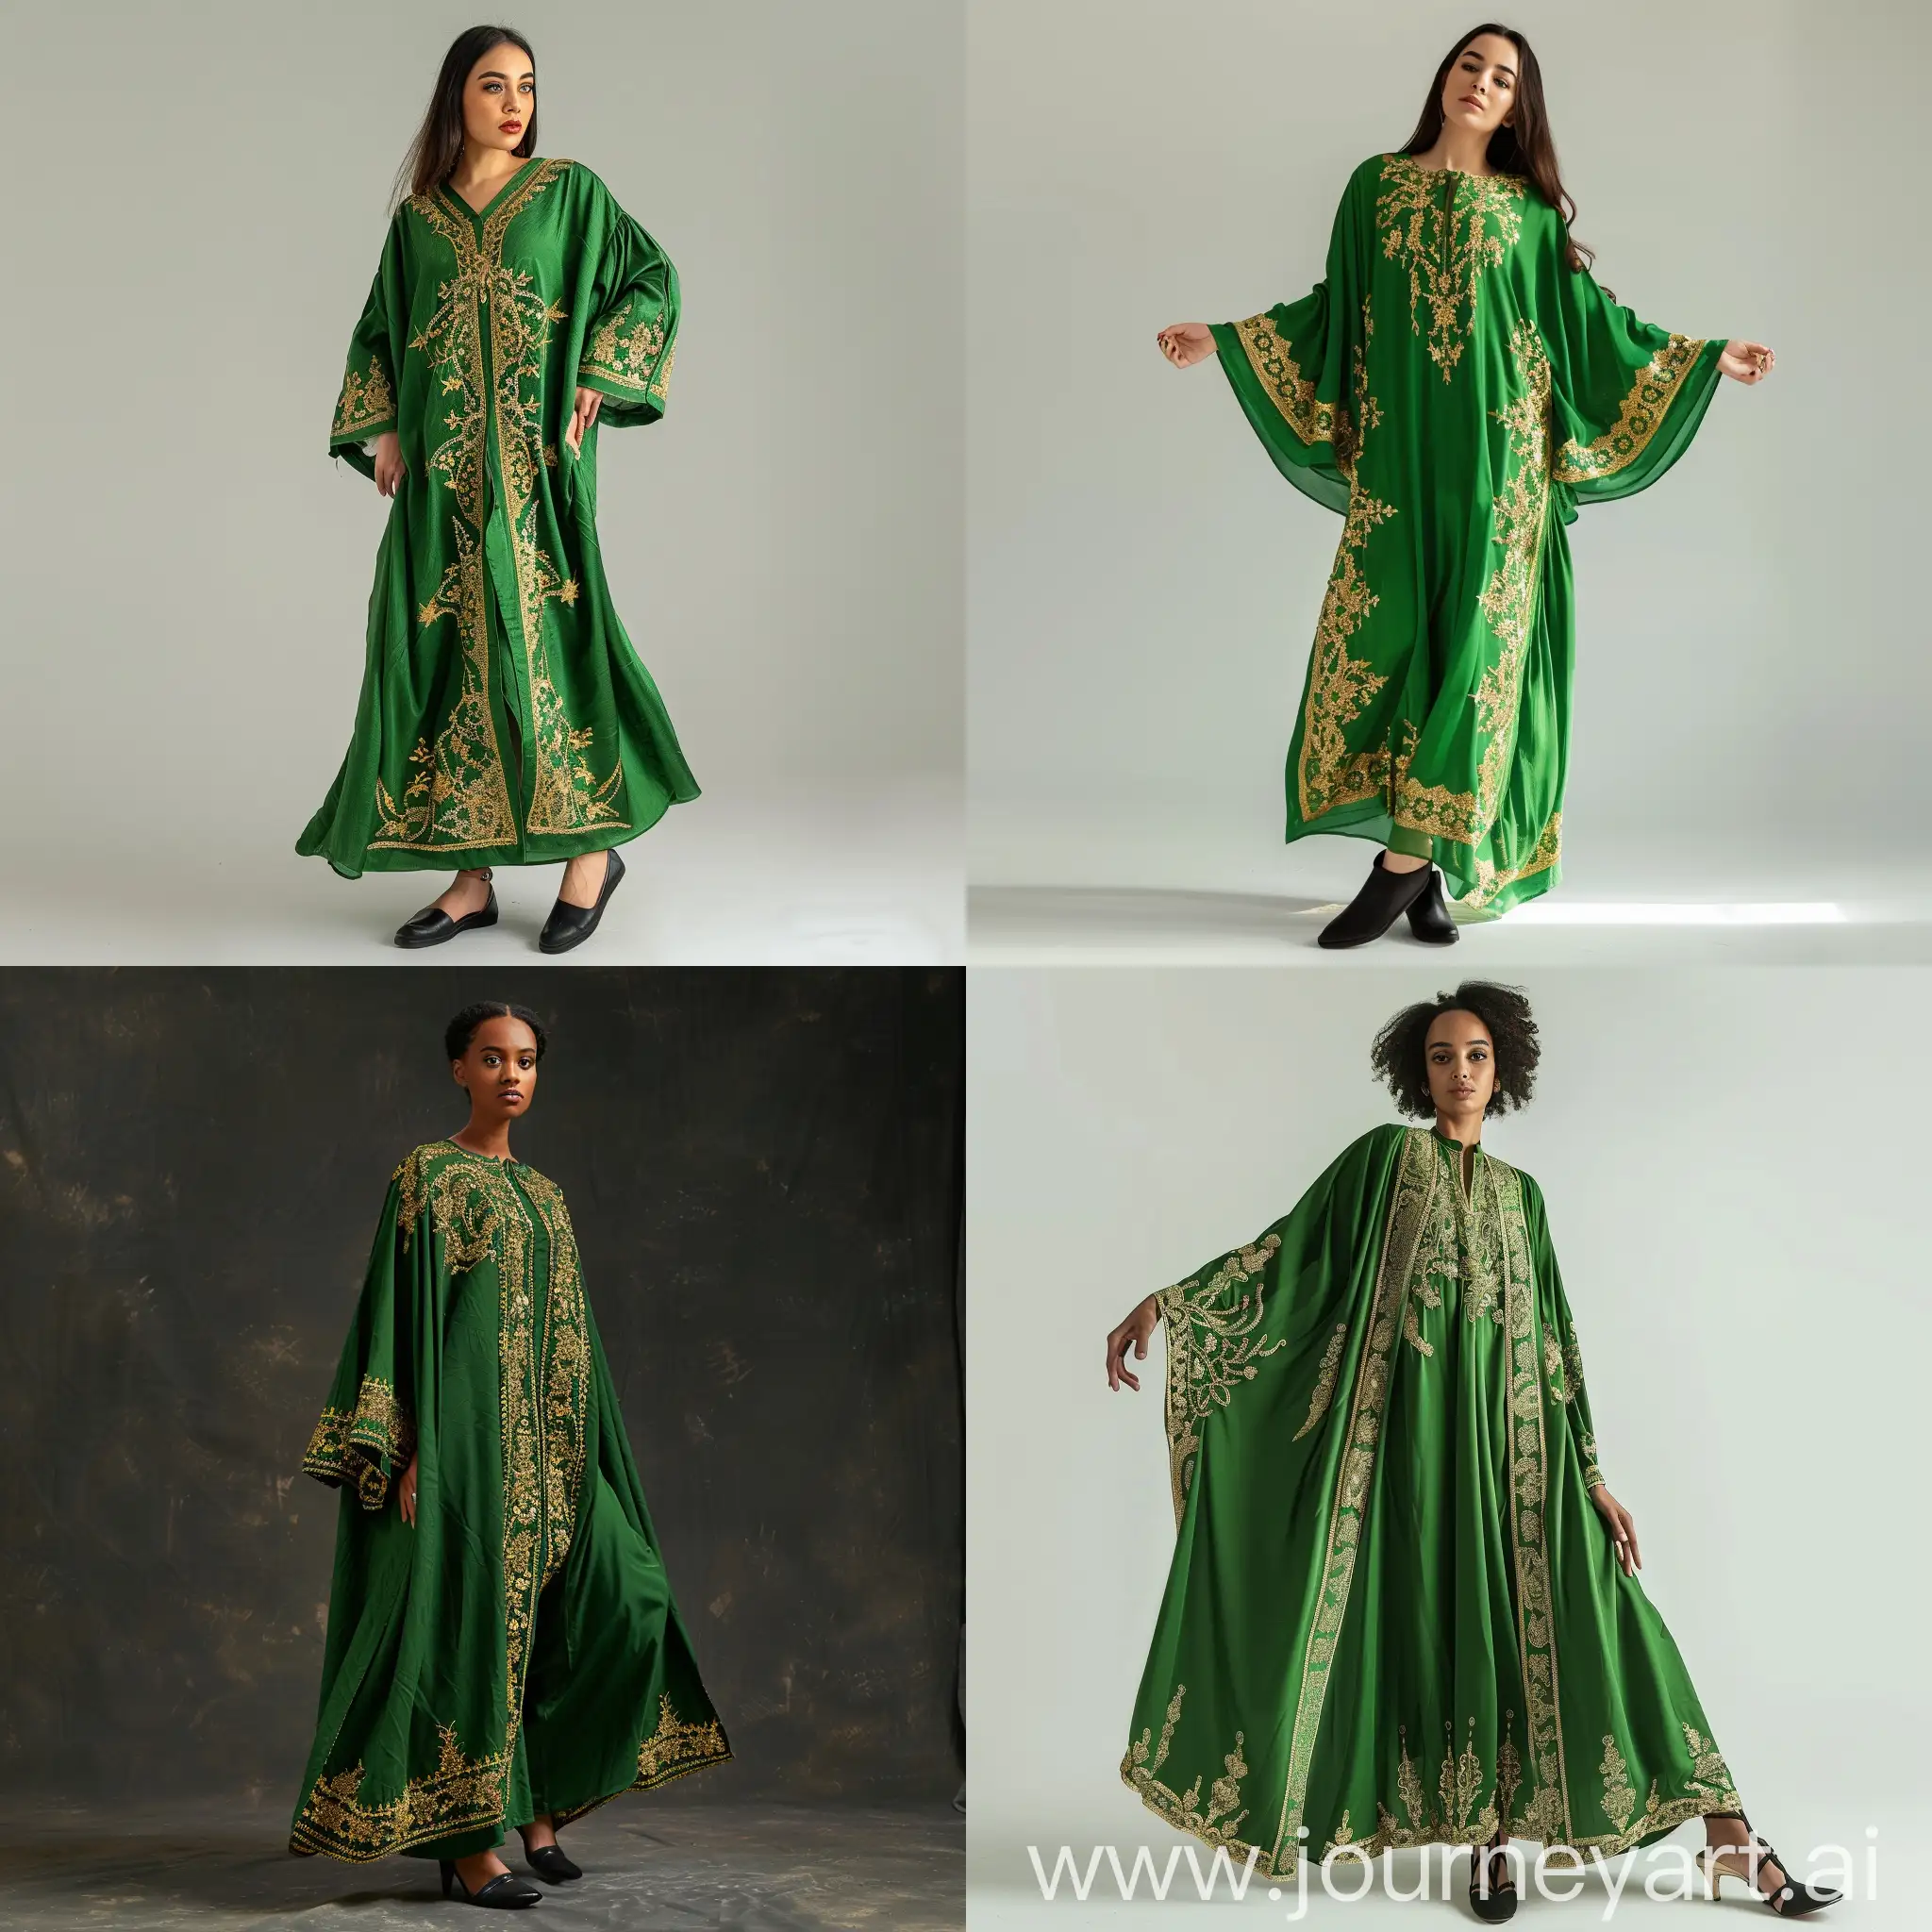 Elegant-Woman-in-Green-Caftan-with-Golden-Embroidery-and-Black-Shoes